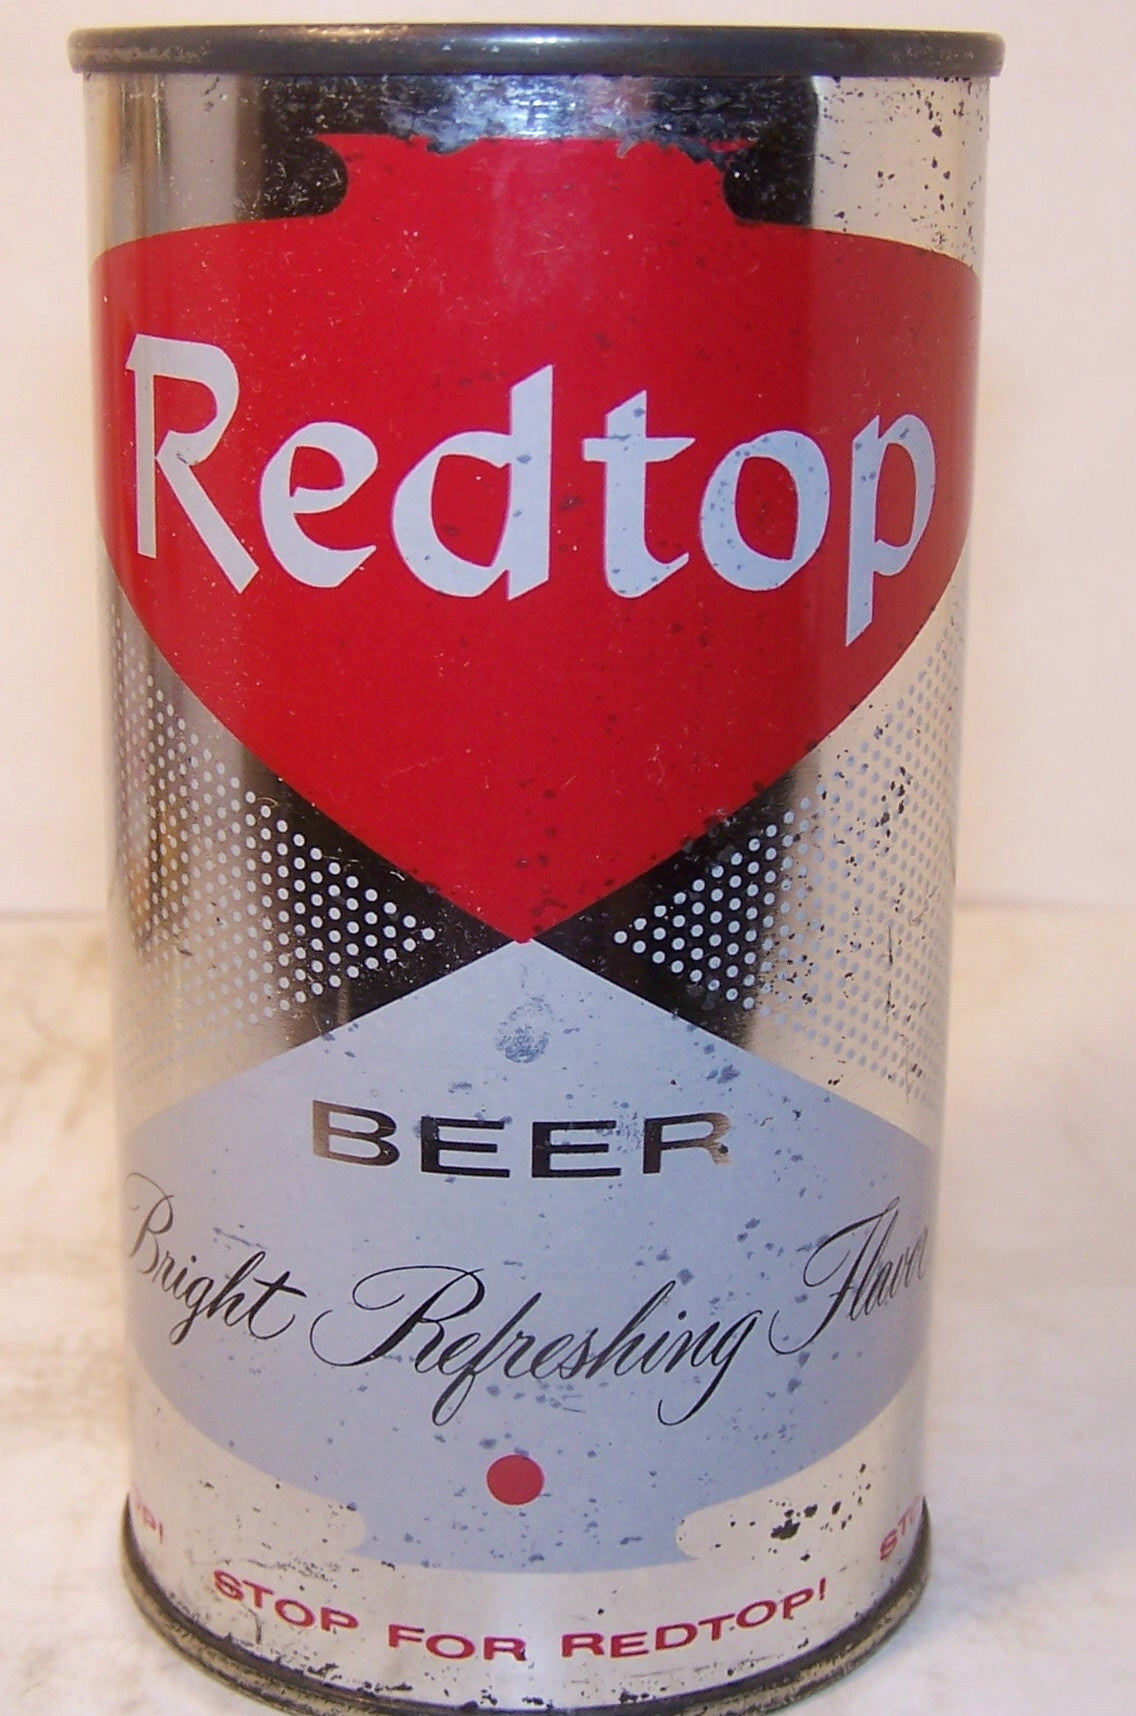 Red Top Beer, USBC 119-27 (Chicago) Grade 1- Sold on 2/14/15